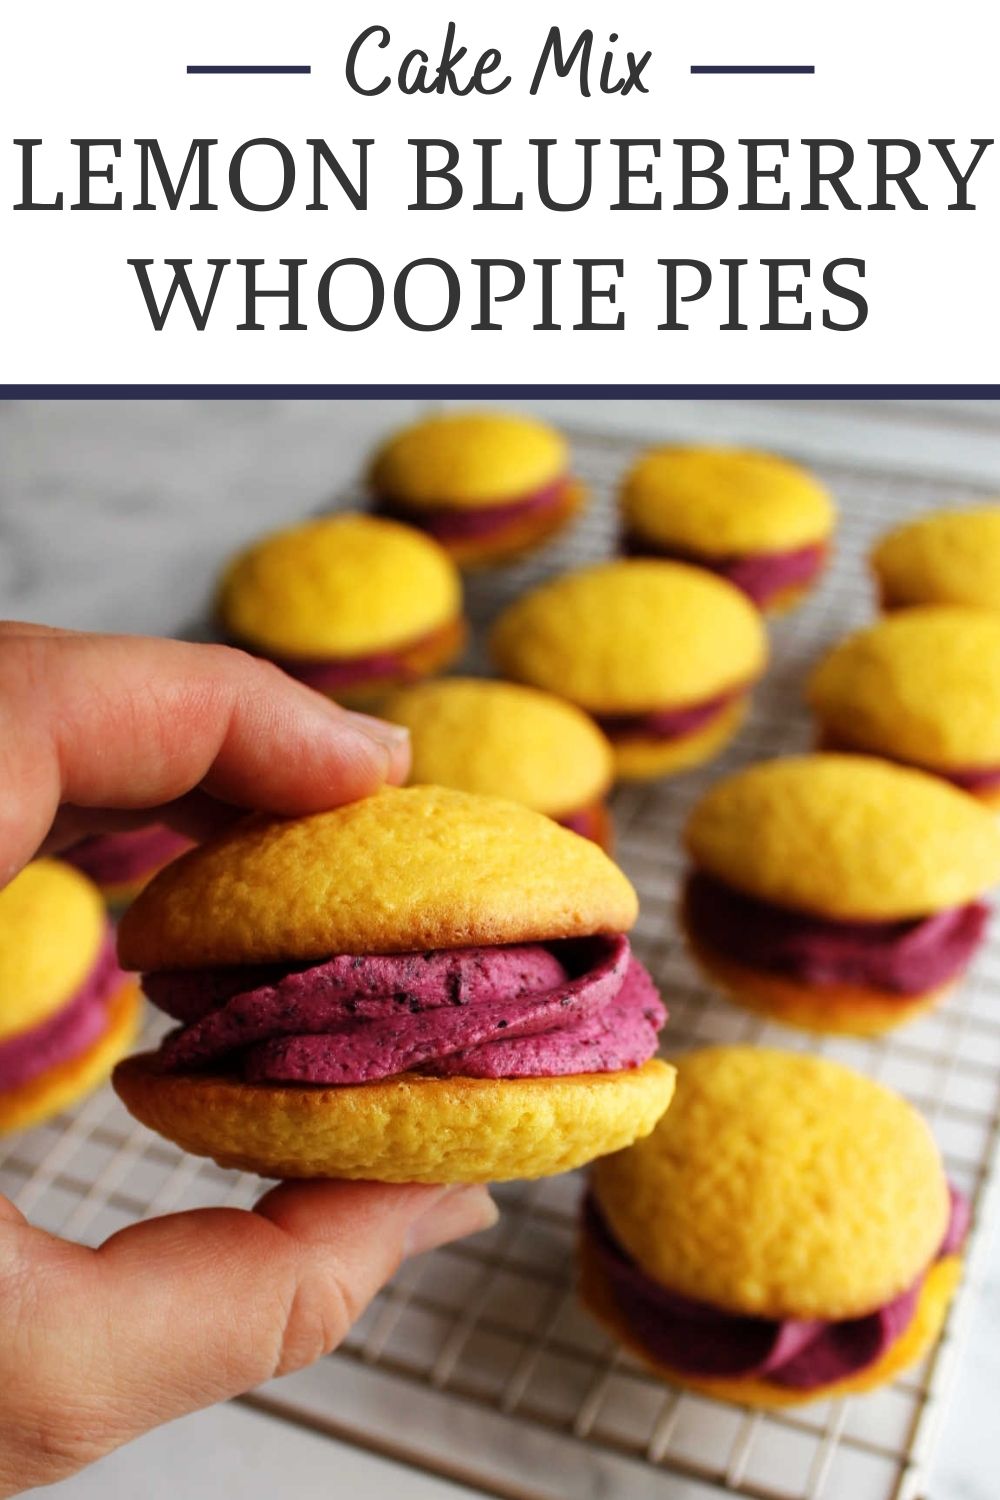 Soft lemon whoopie pies filled with bright blueberry buttercream are easy to make with the help of a cake mix. They are a perfect handheld treat for spring and summer.